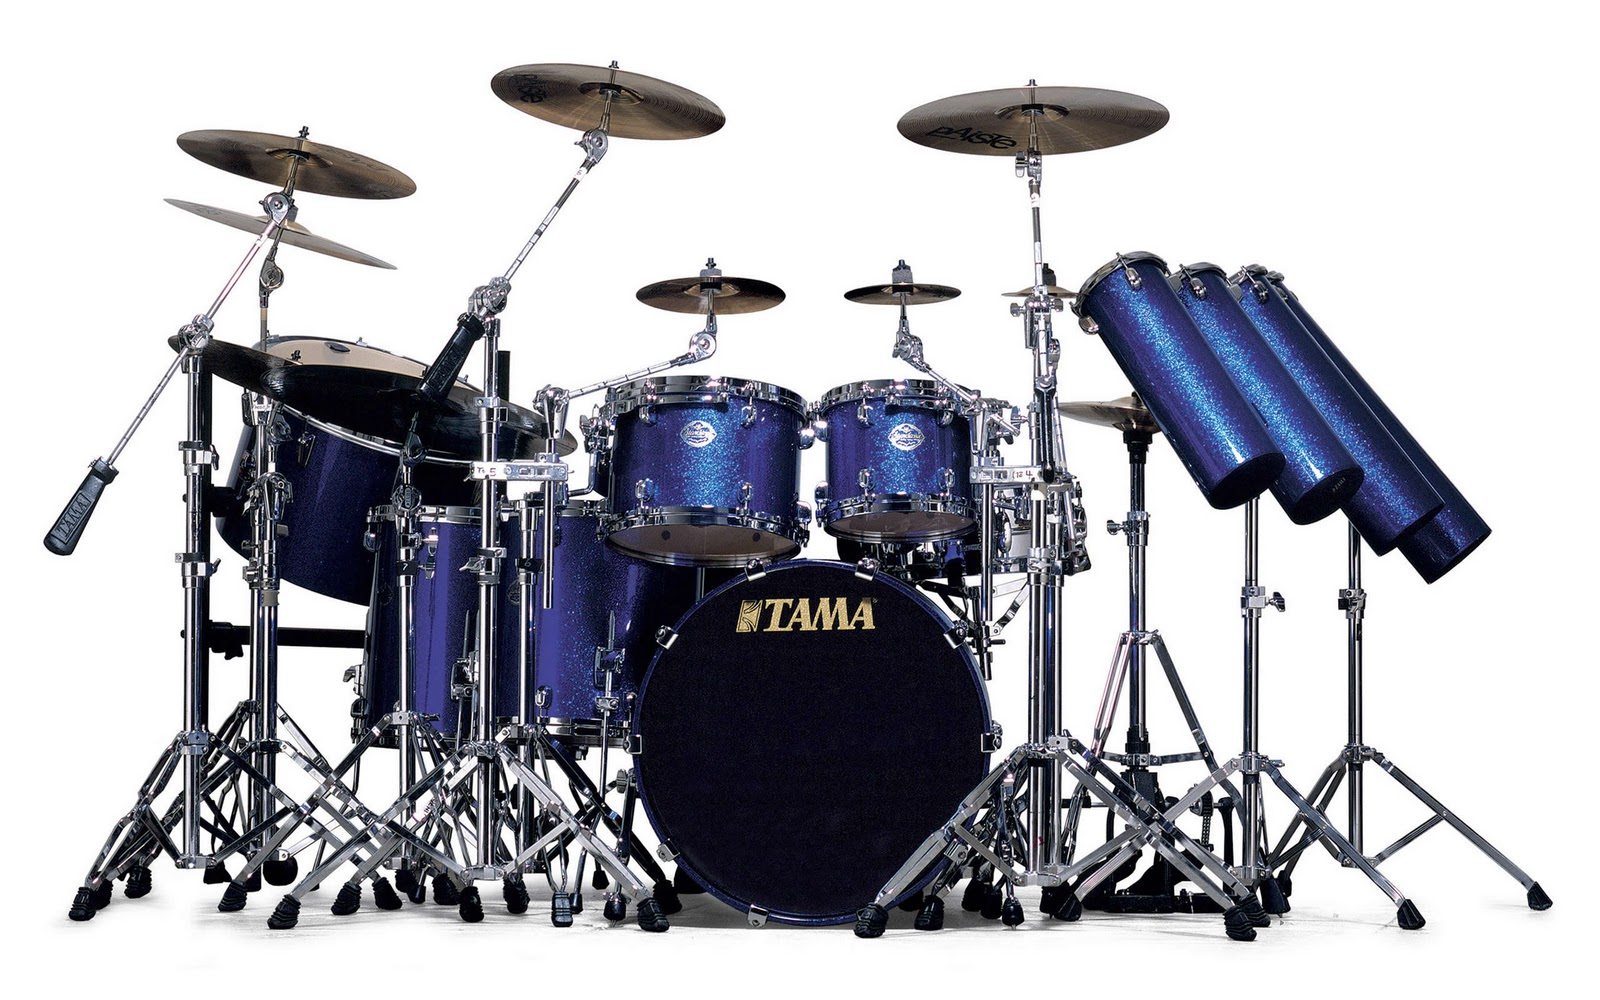 In addition to manufacturing drums TAMA also offers a variety of